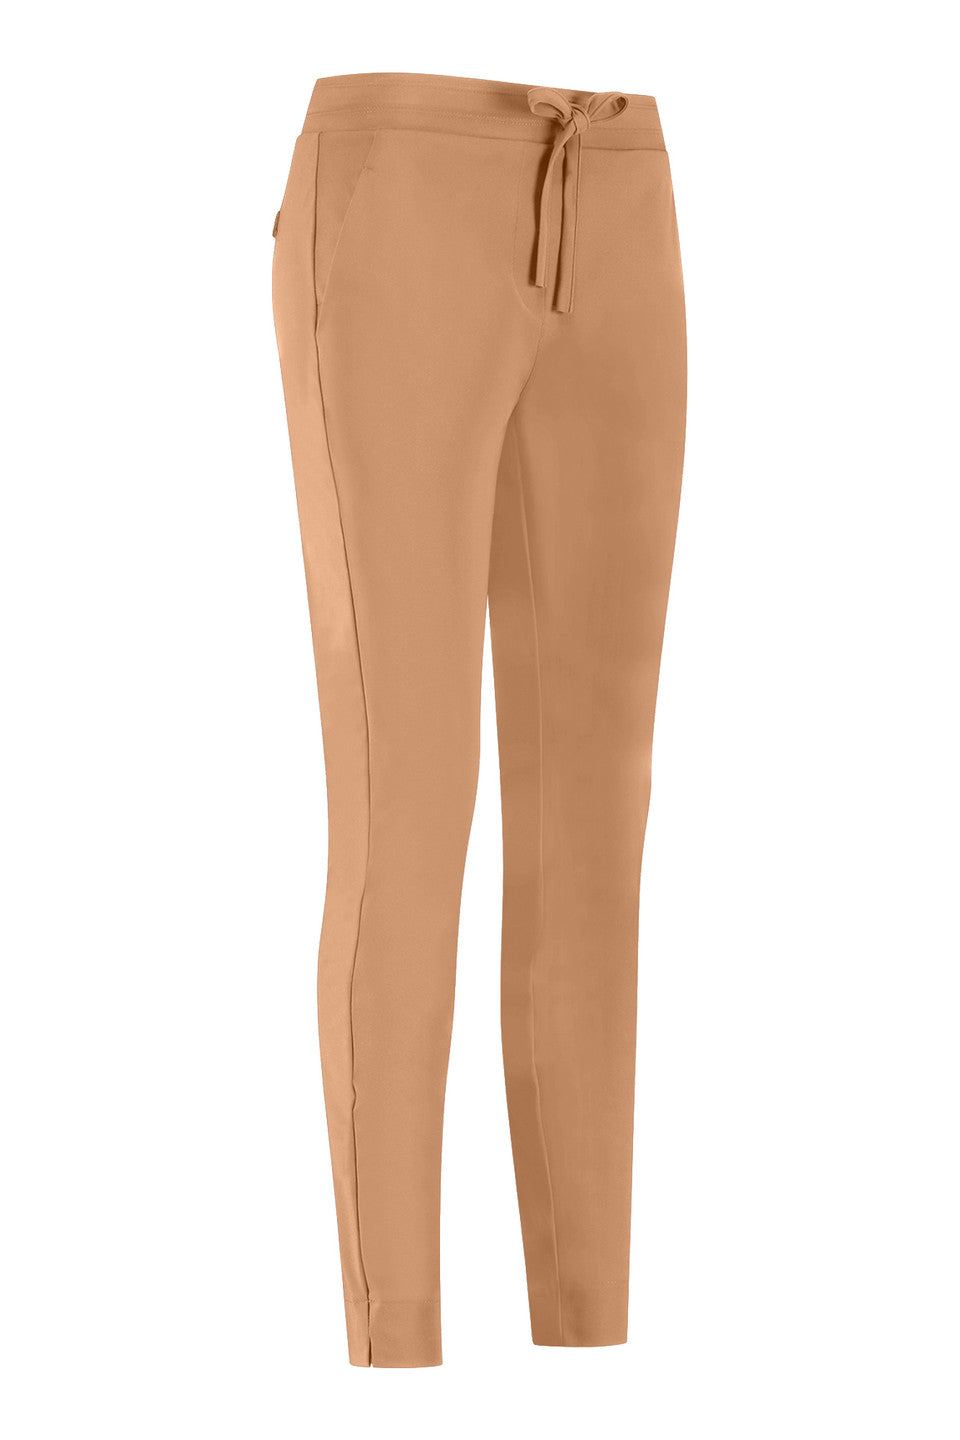 Studio Anneloes Downstairs bonded trousers camel